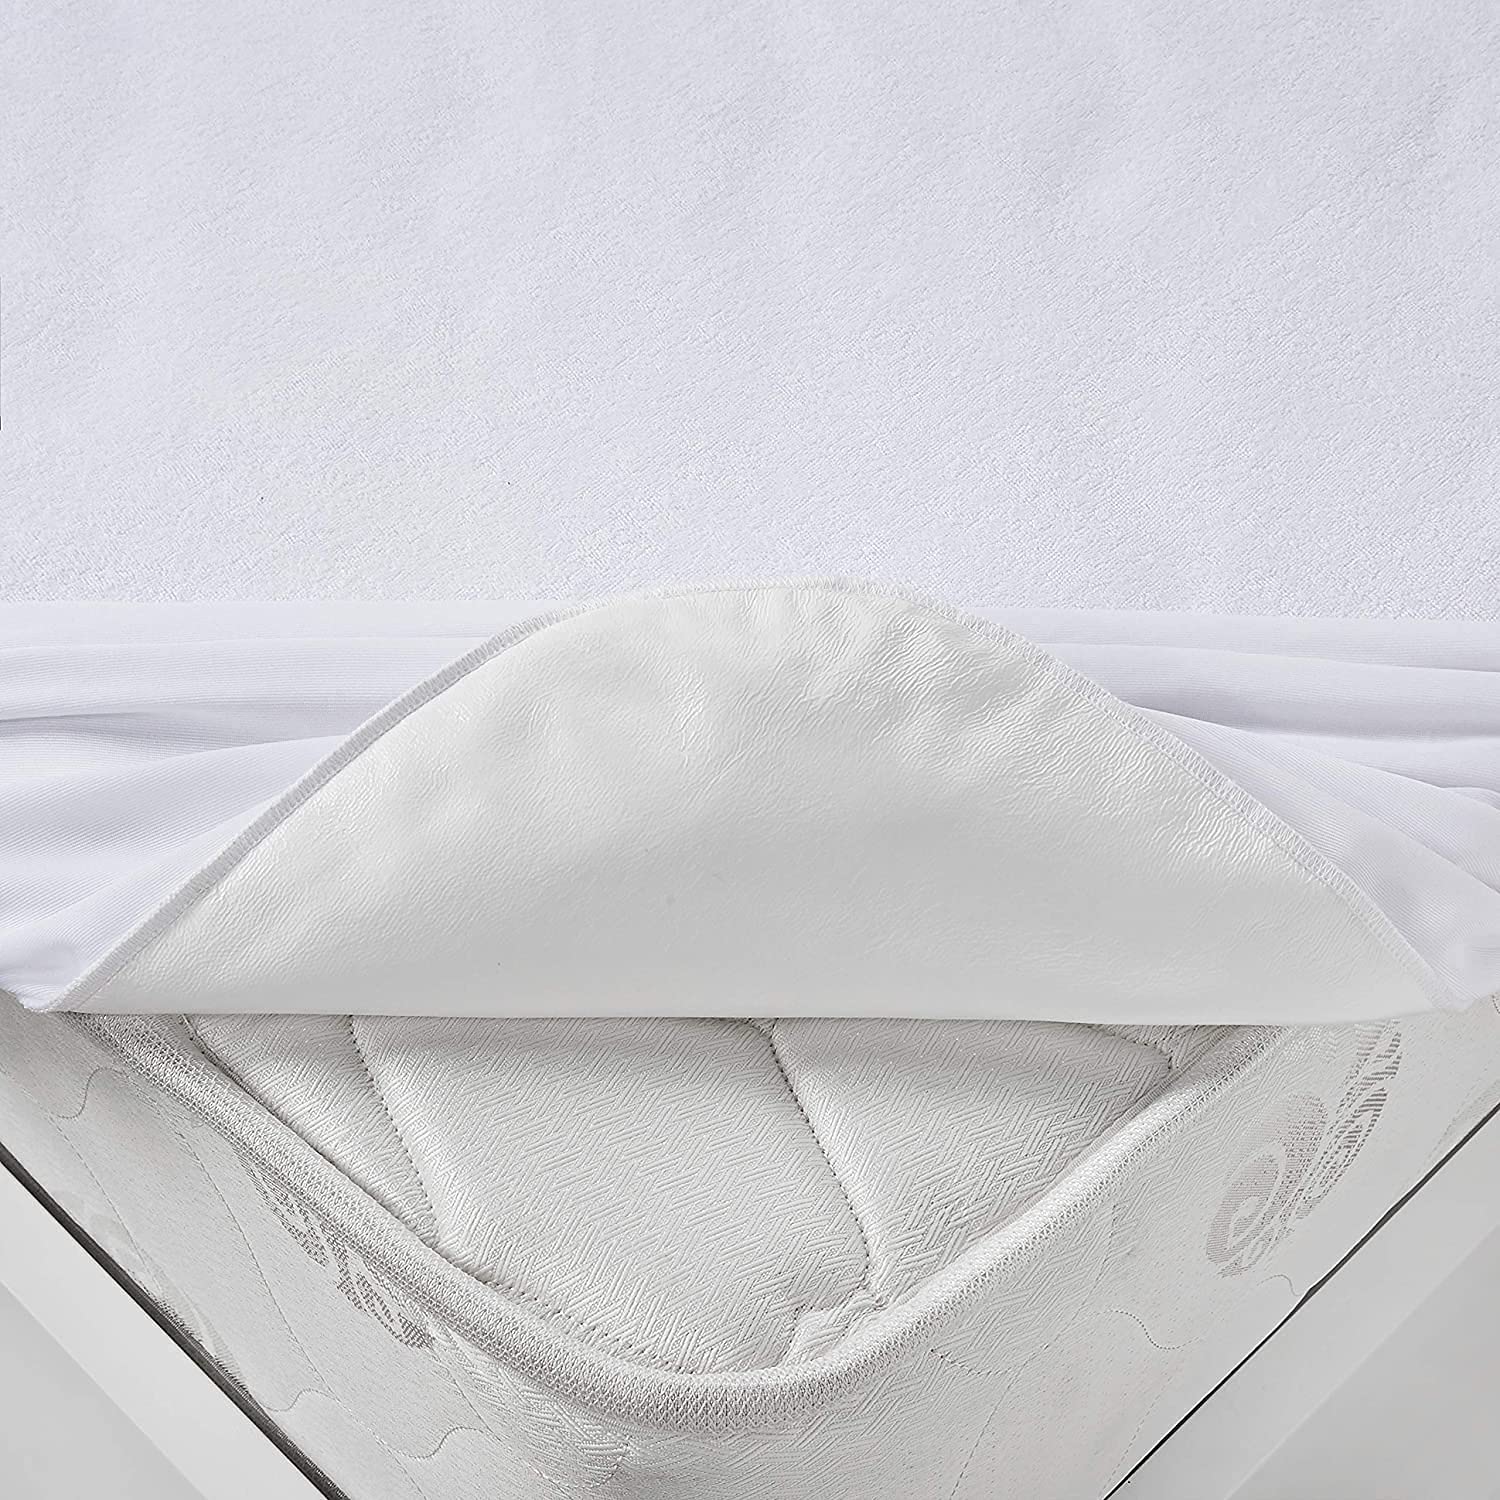 Toro Blu Toro Blu Water Proof Terry Cloth Mattress Protector for King Size Bed (78" x 72 INCH, White) Toro Blu 899.00 Toro Blu  Toro Blu Water Proof Terry Cloth Mattress Protector for King Size Bed (78" x 72 INCH, White)